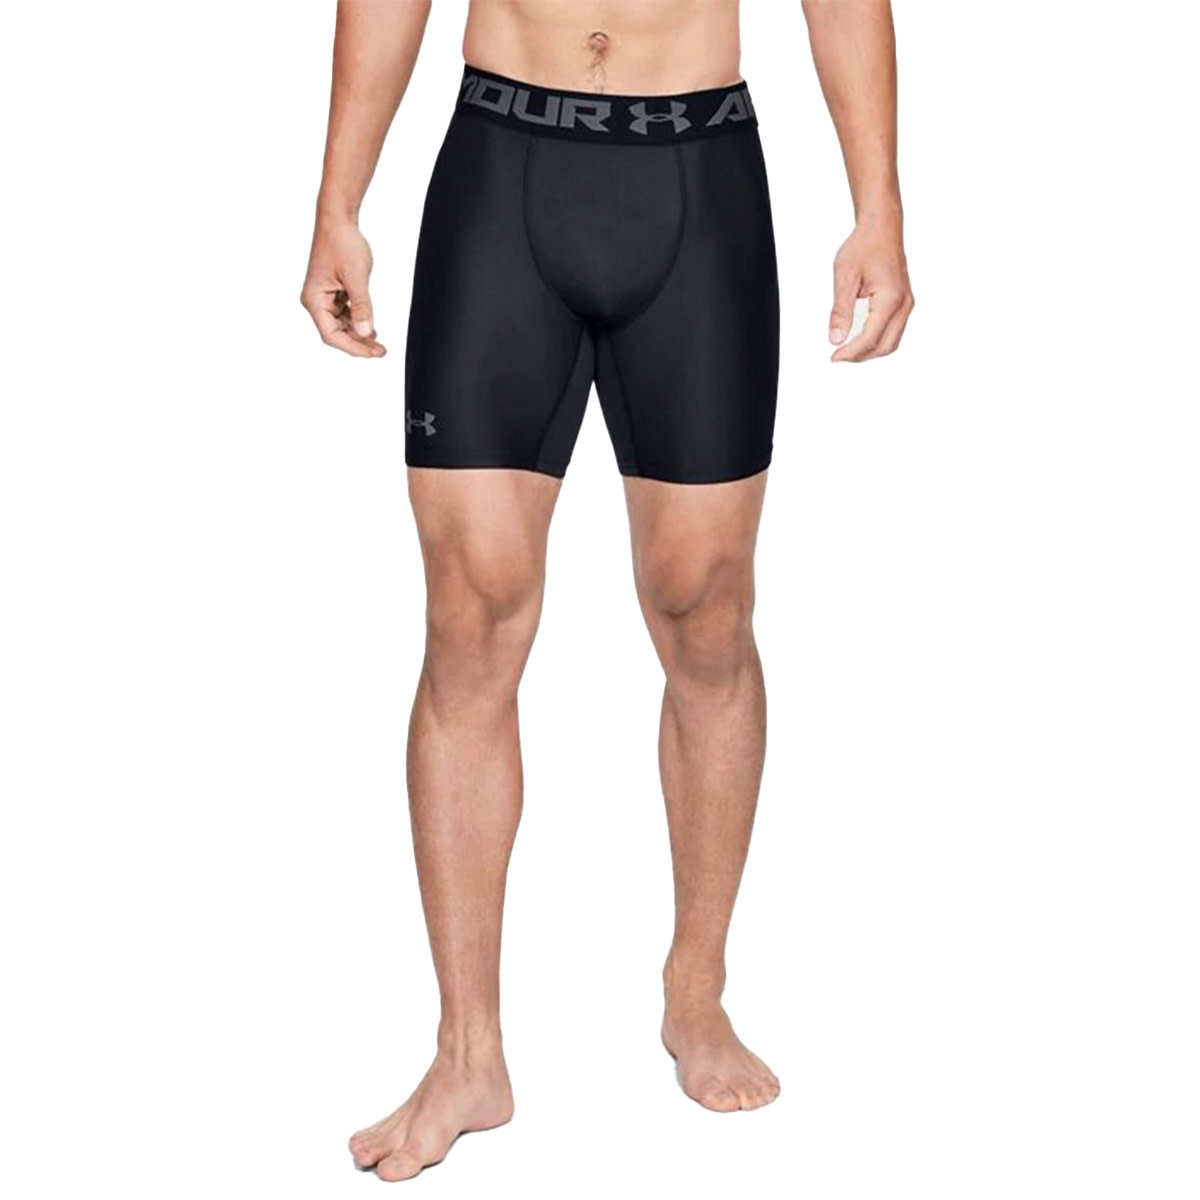 Under Armour Women's Armour Compression Shorts